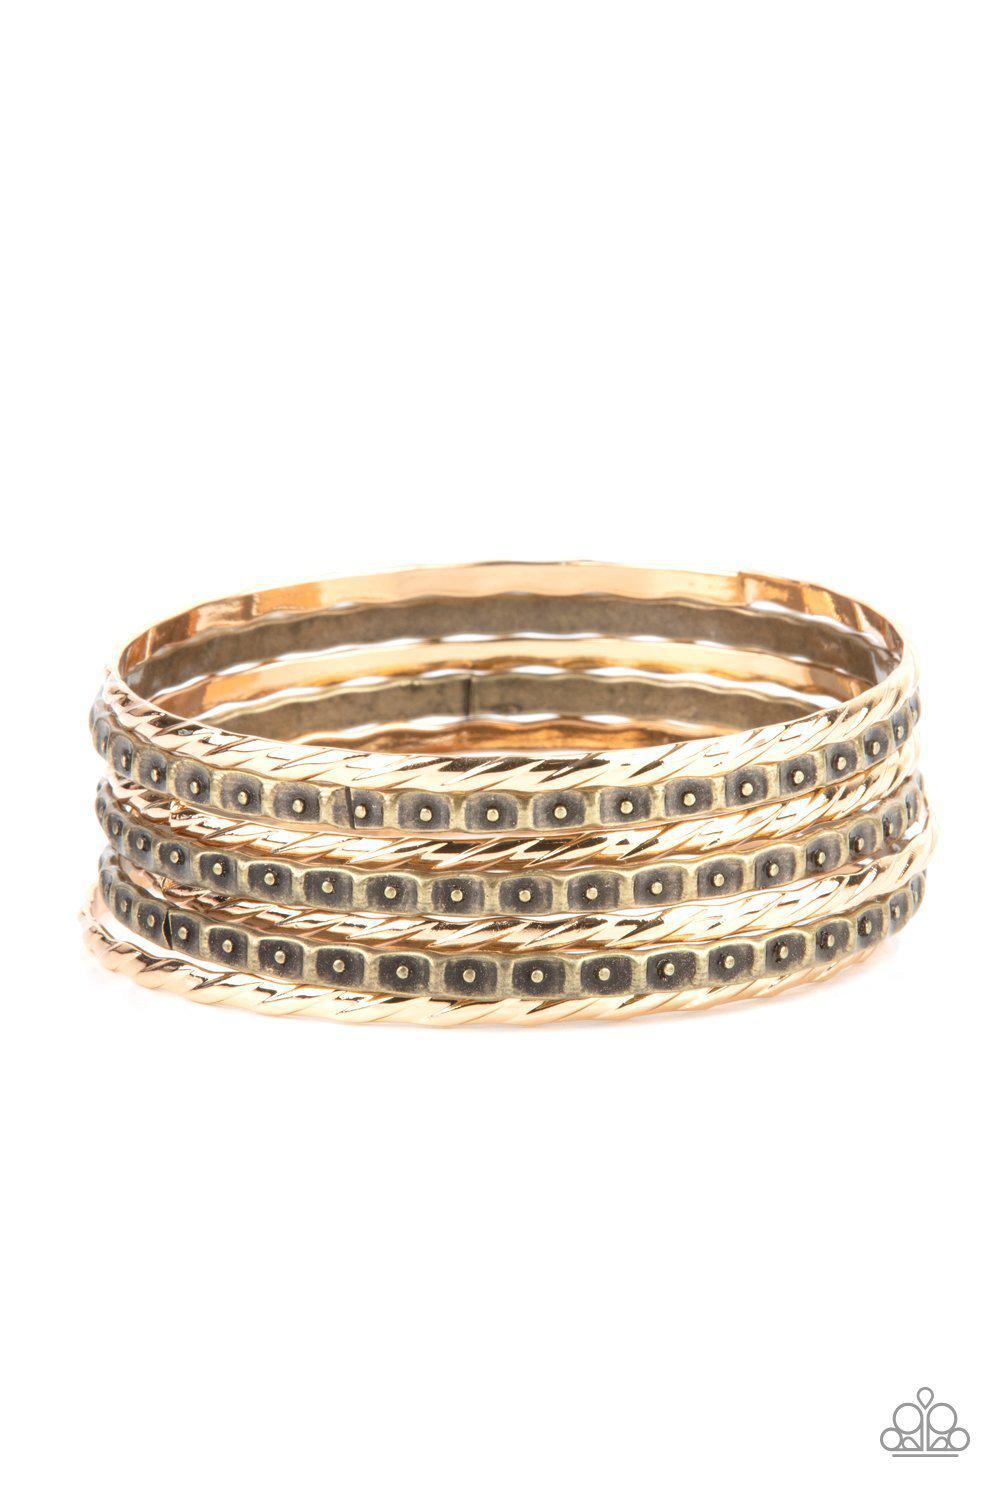 Back-To-Back Stacks Multi Gold and Brass Bangle Bracelet Set - Paparazzi Accessories - lightbox -CarasShop.com - $5 Jewelry by Cara Jewels